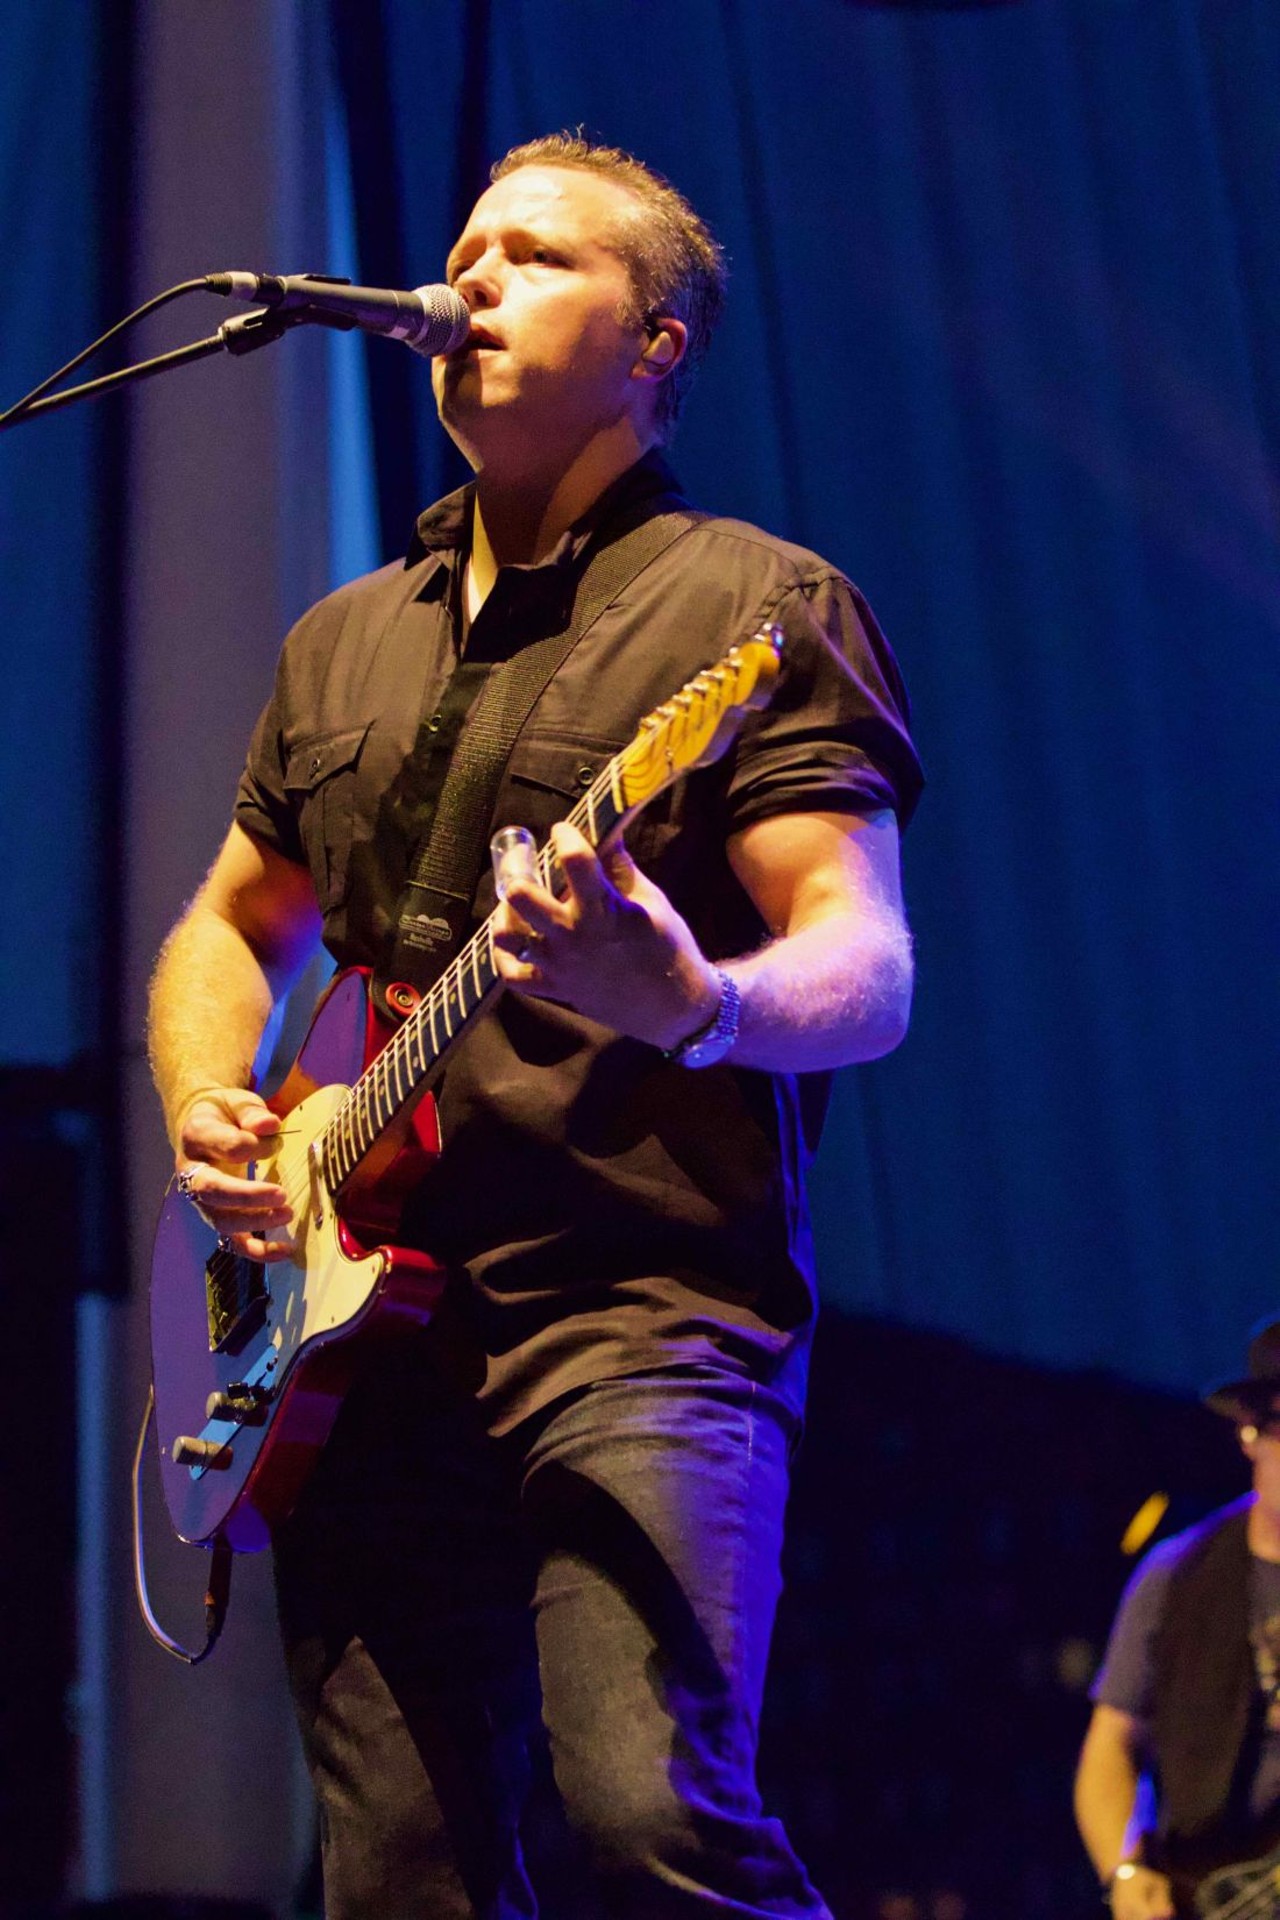 Jason Isbell & the 400 Unit Playing at Jacobs Pavilion at Nautica